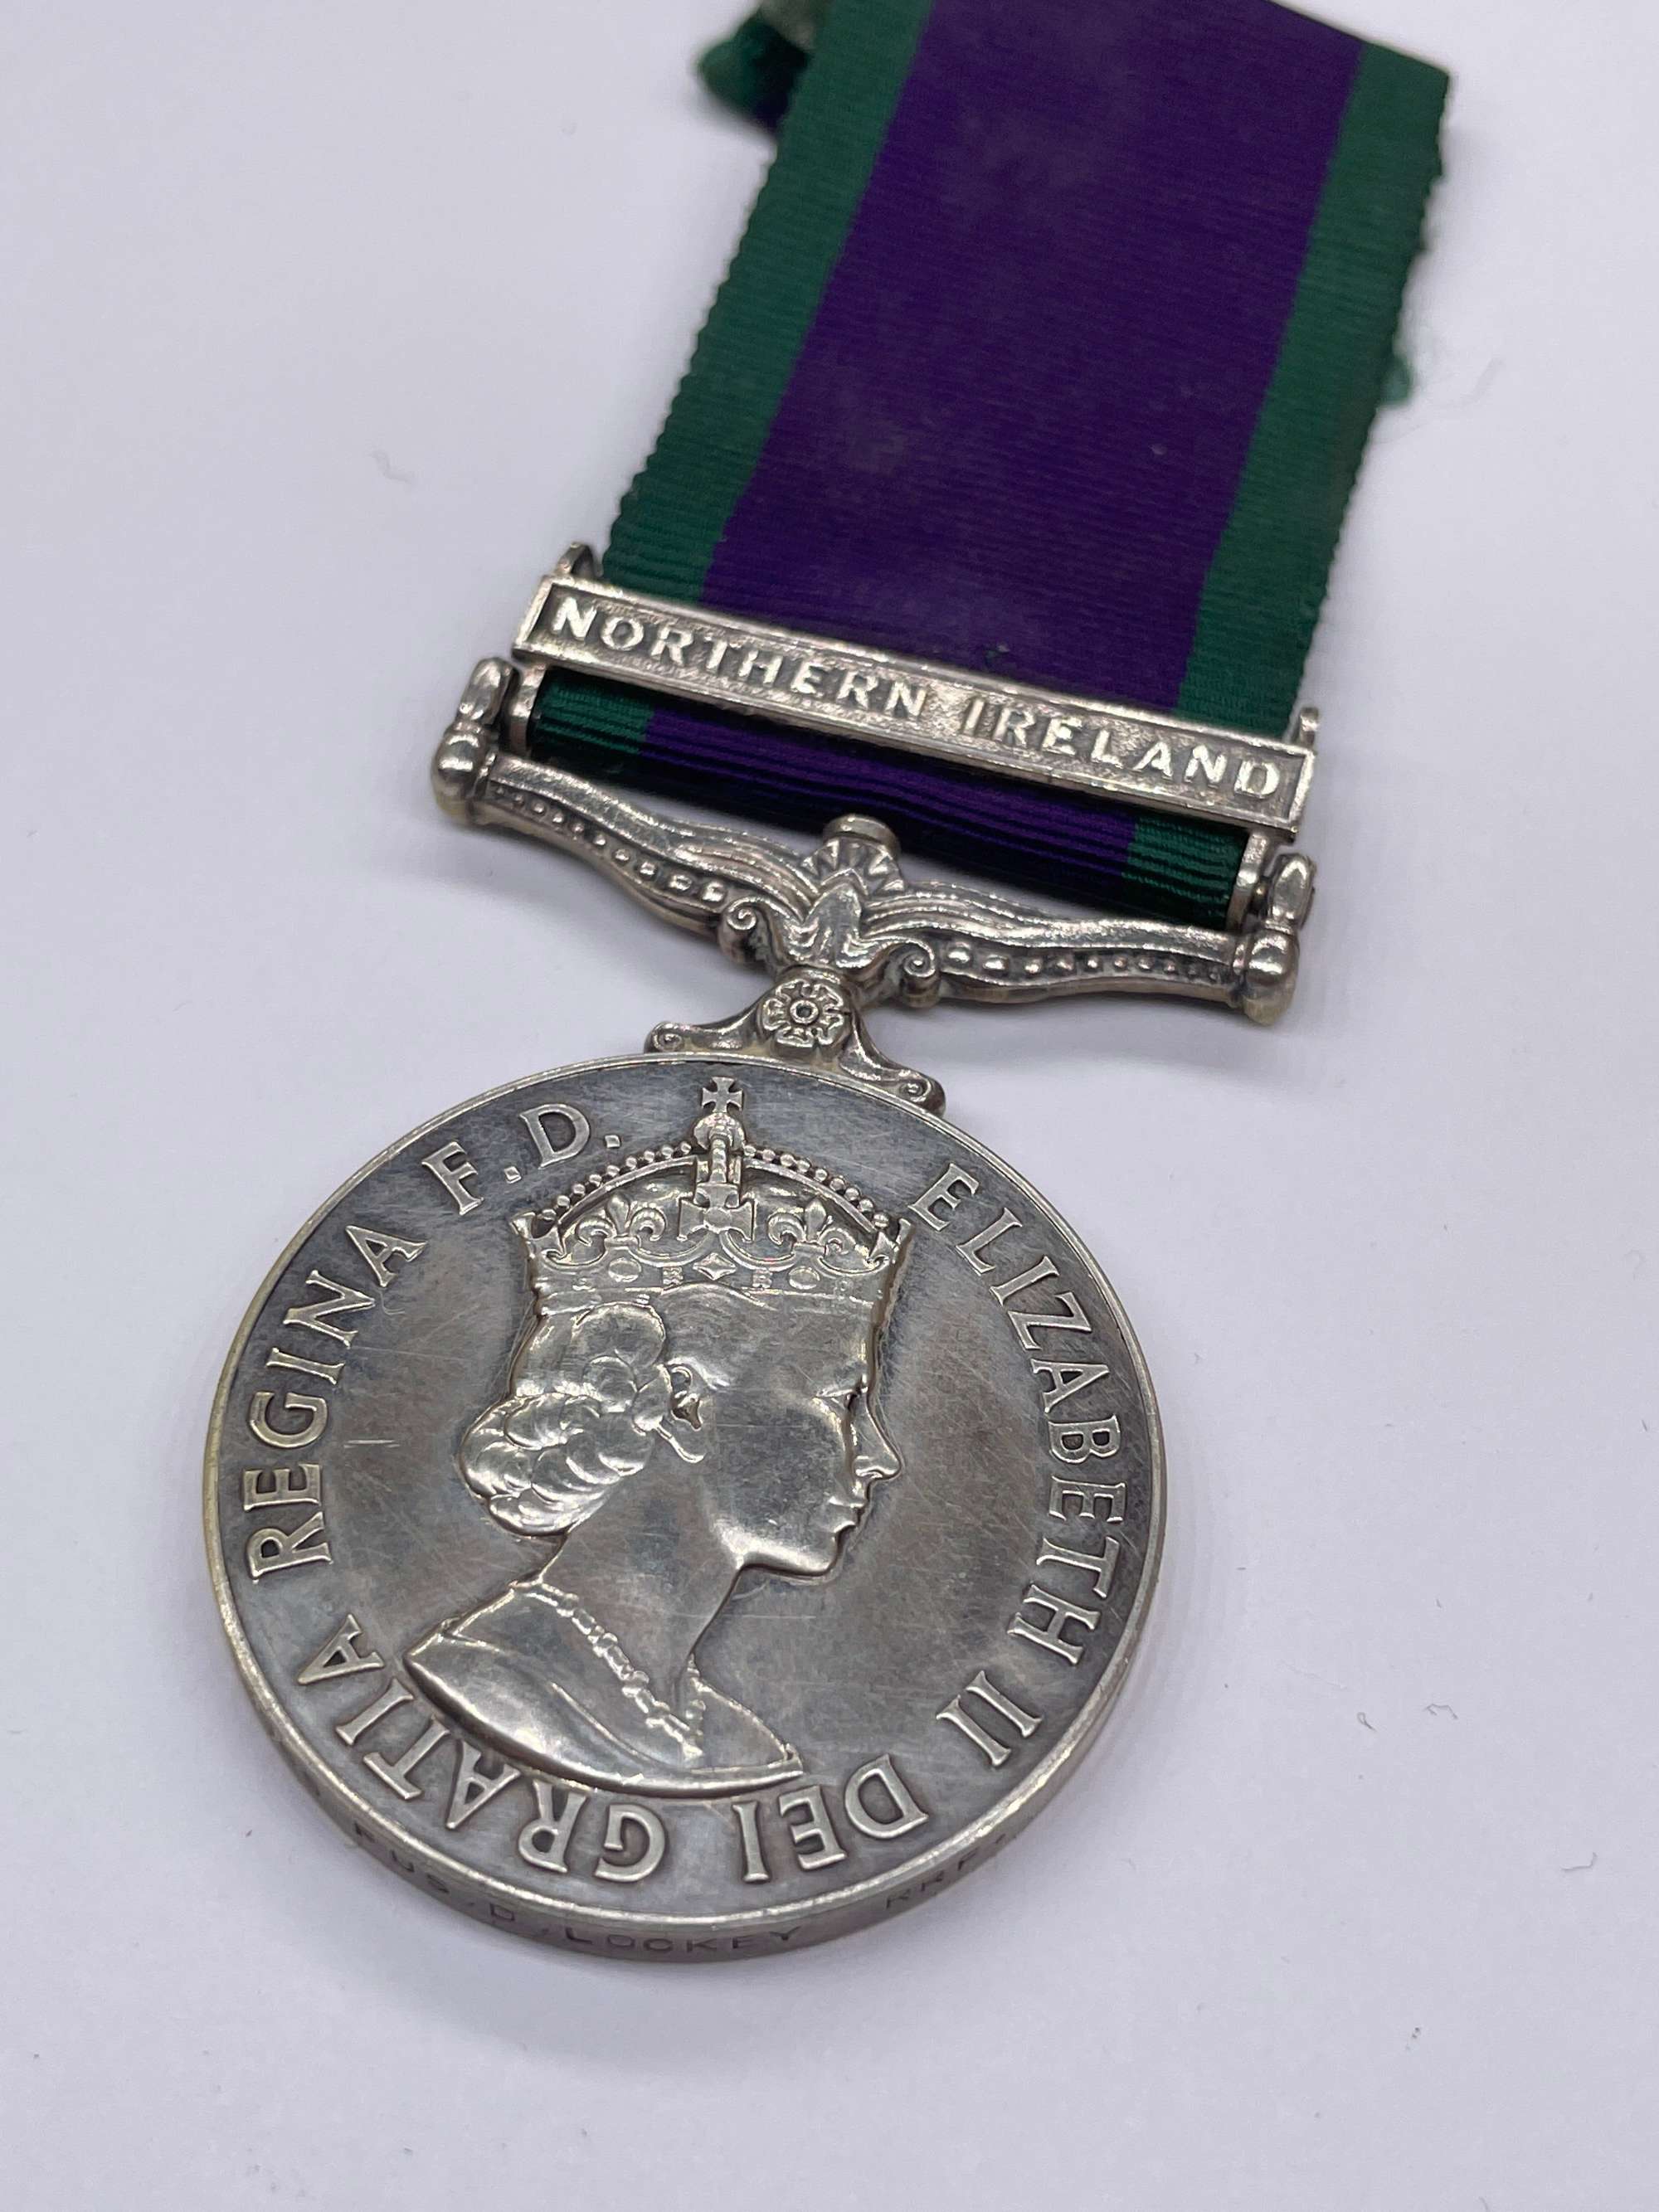 Original 1962 Pattern General Service Medal, Fus. Lockey, Northern Ireland Clasp, Royal Regiment of Fusiliers